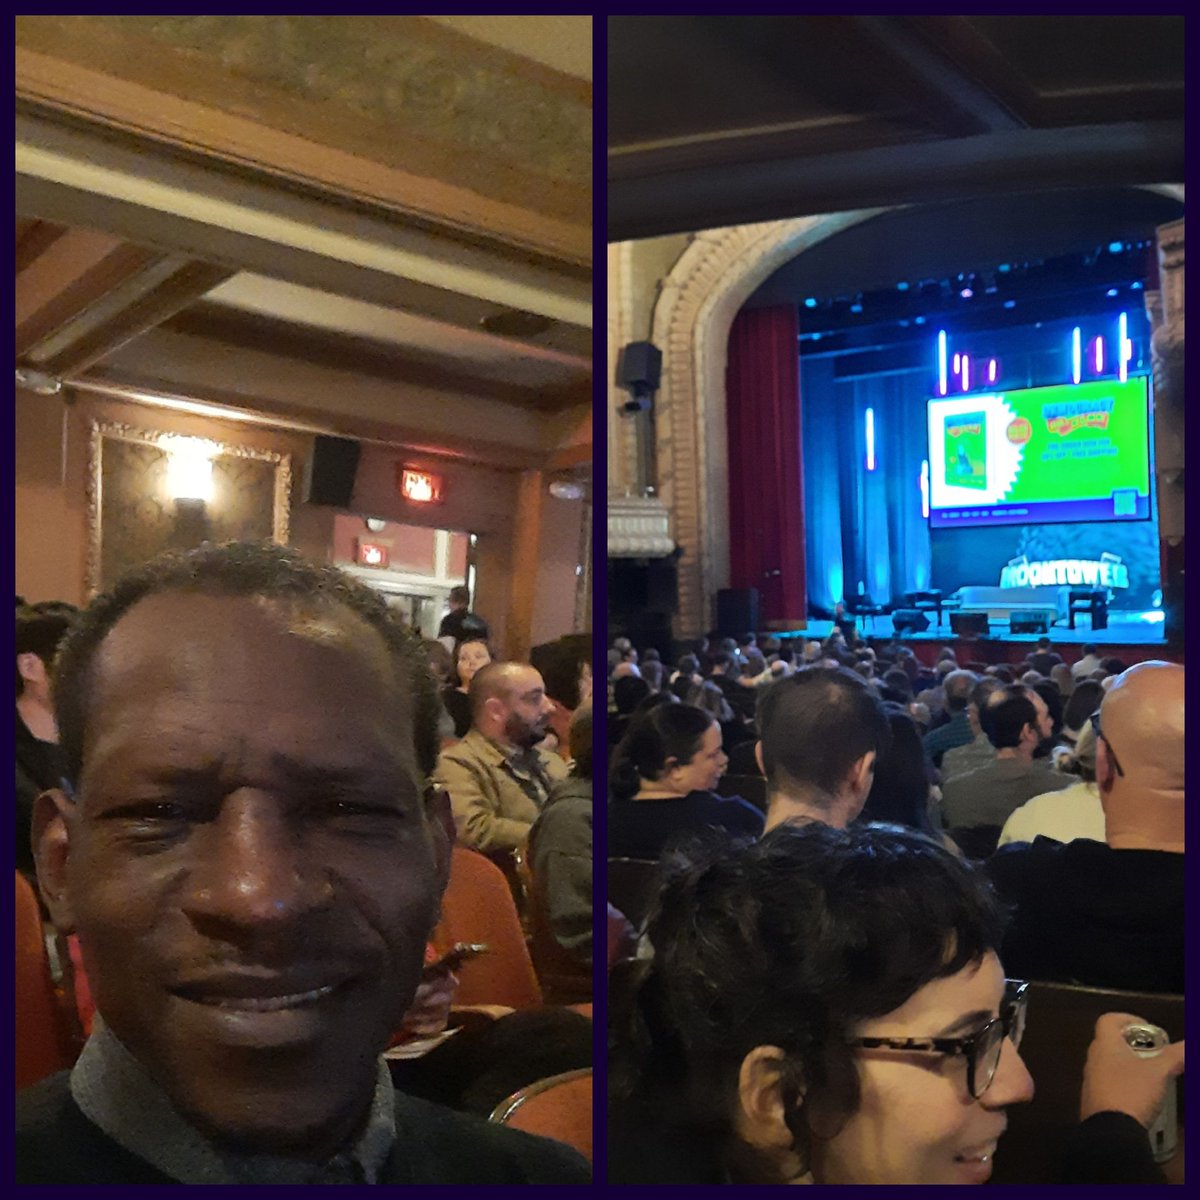 Enjoyed it!!!!!!!!!!!!! Don't really know how i shopped a smile the way my day has went. 11 days,last show,just glad to be hear and catch one @MoontowerComedy Festival Show.......Glad i did!!